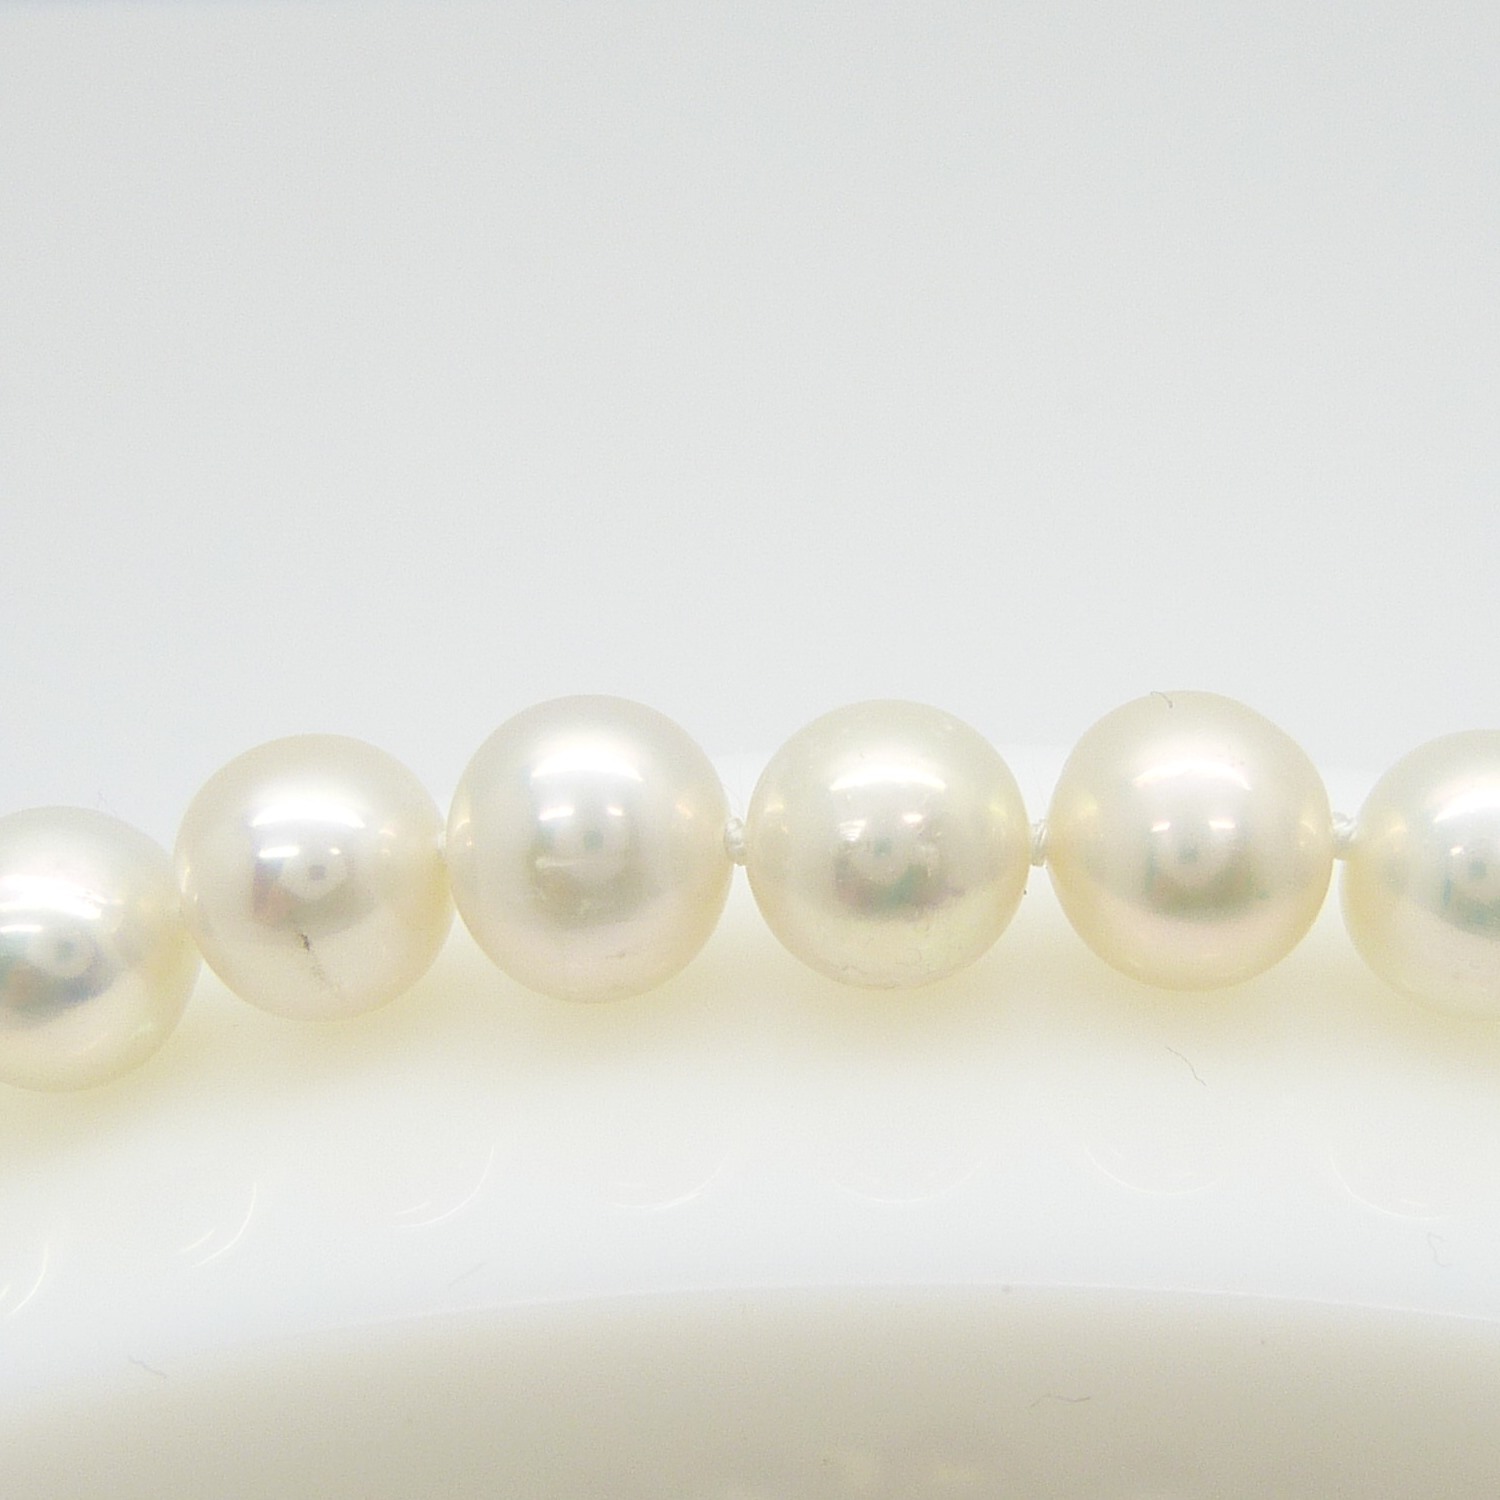 A necklace strung with white cultured pearls and fitted with a 9ct yellow gold clasp - Image 5 of 7